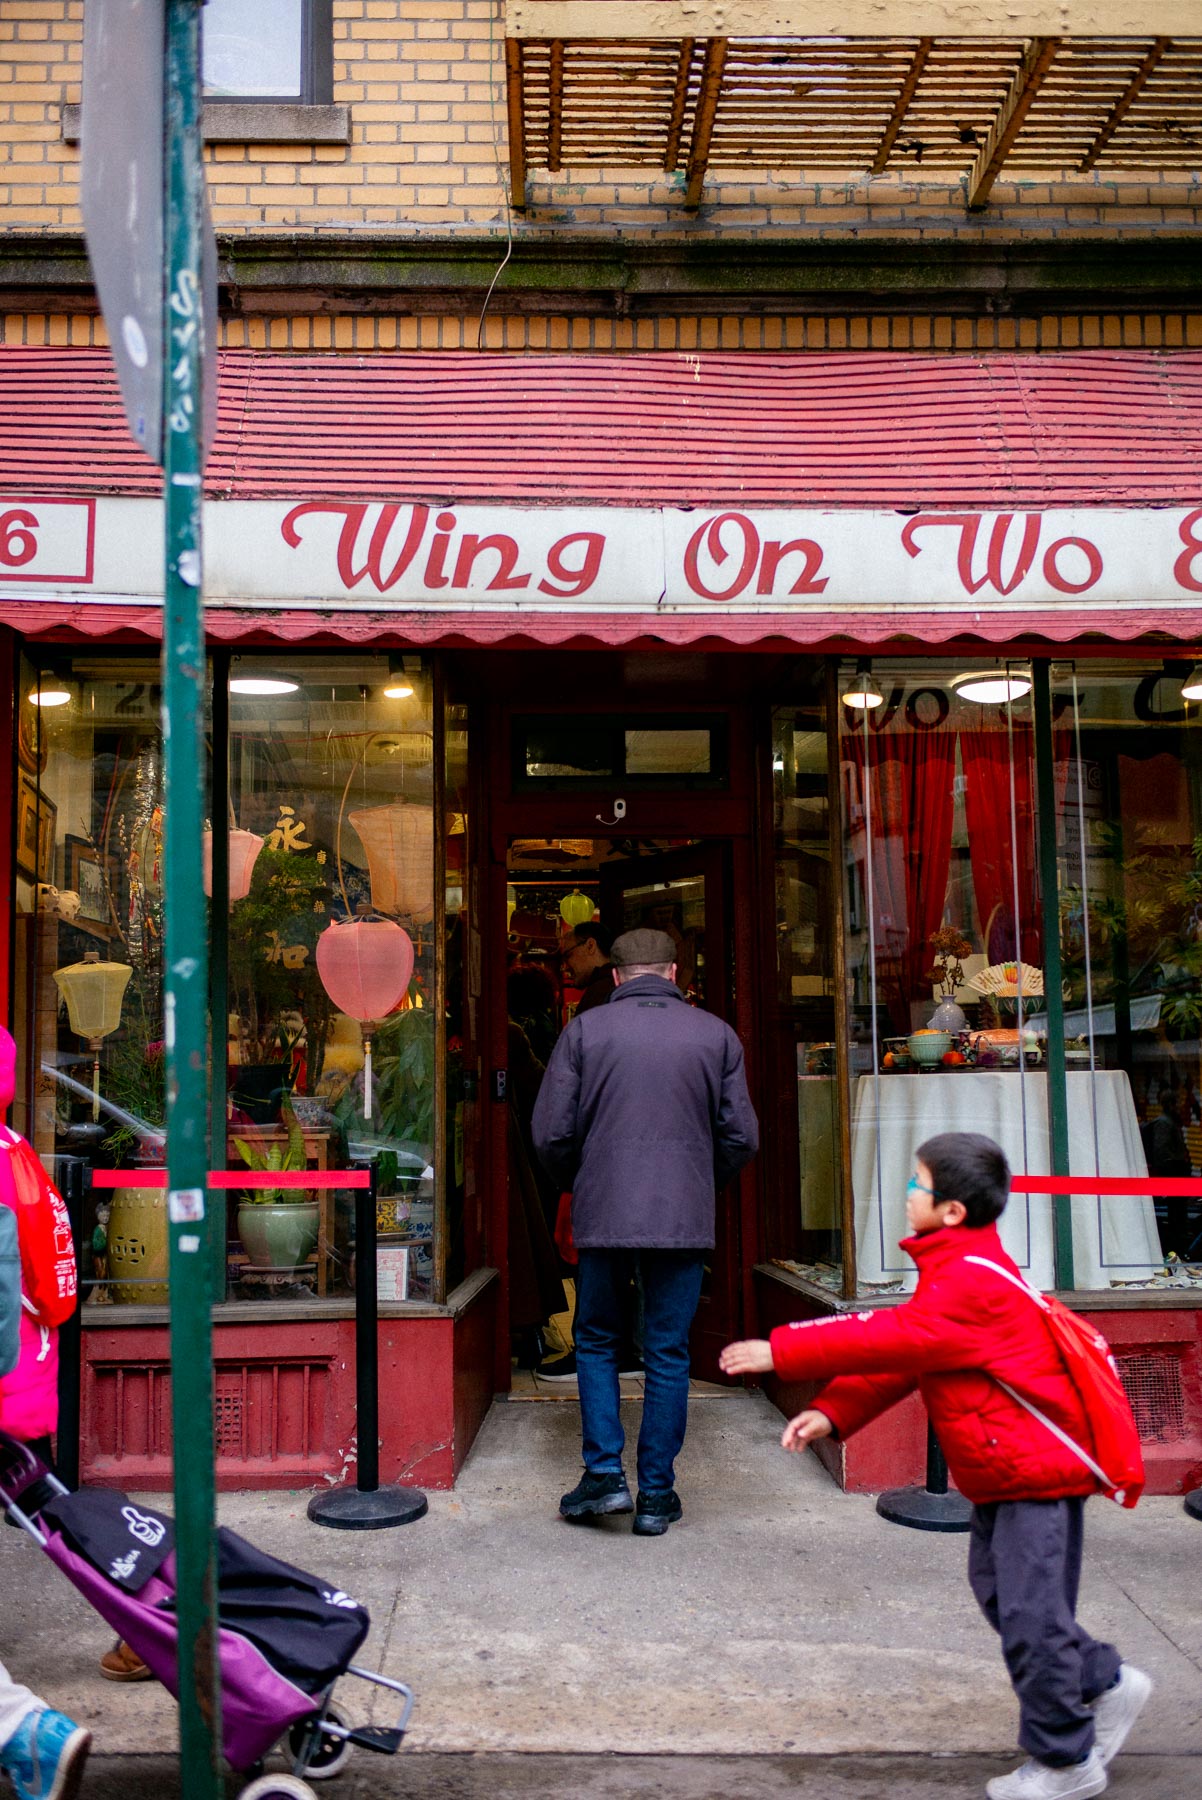 
Wing On Wo & Co
